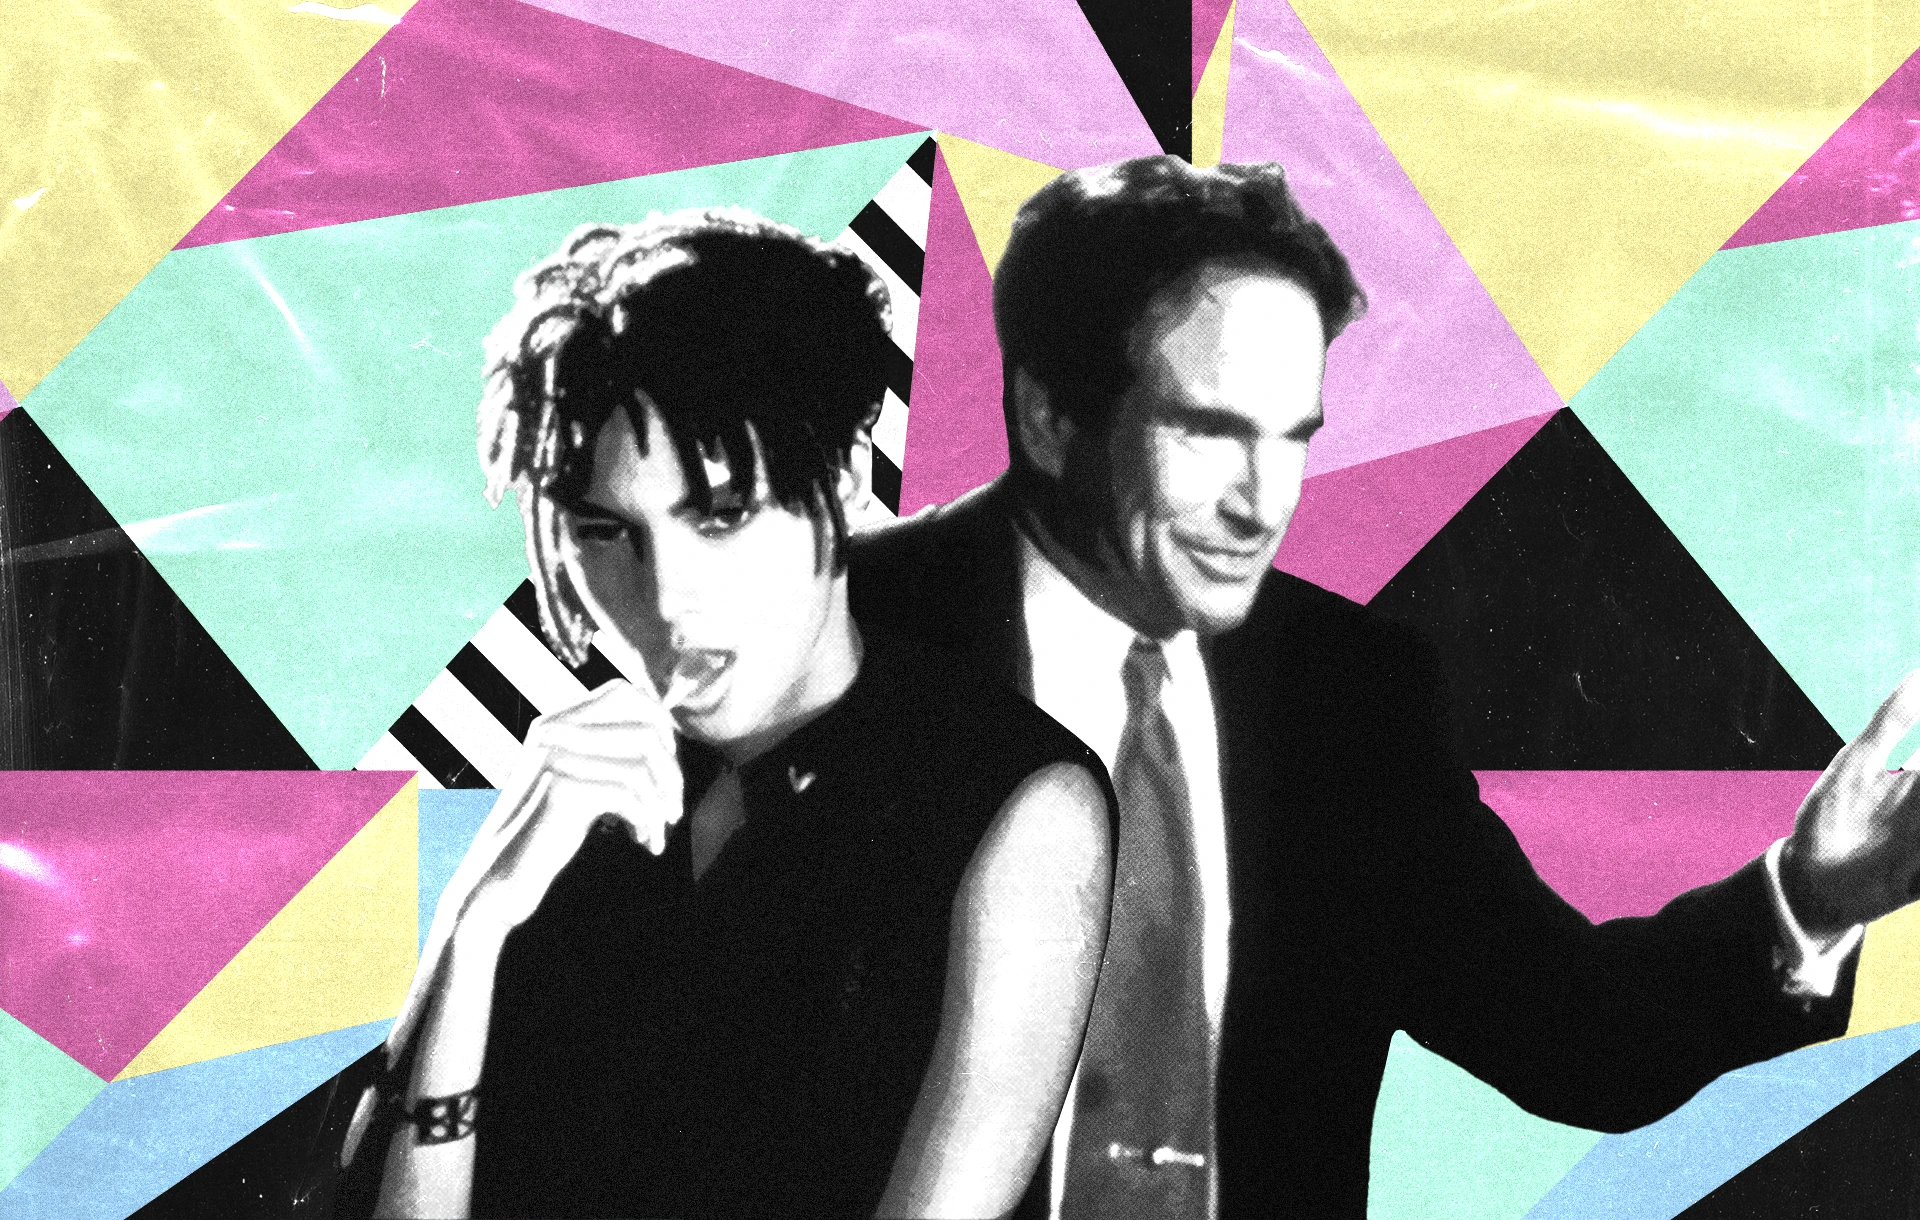 'Bulworth' at 25: Warren Beatty's Hip-Hop Political Manifesto | Features | LIVING LIFE FEARLESS